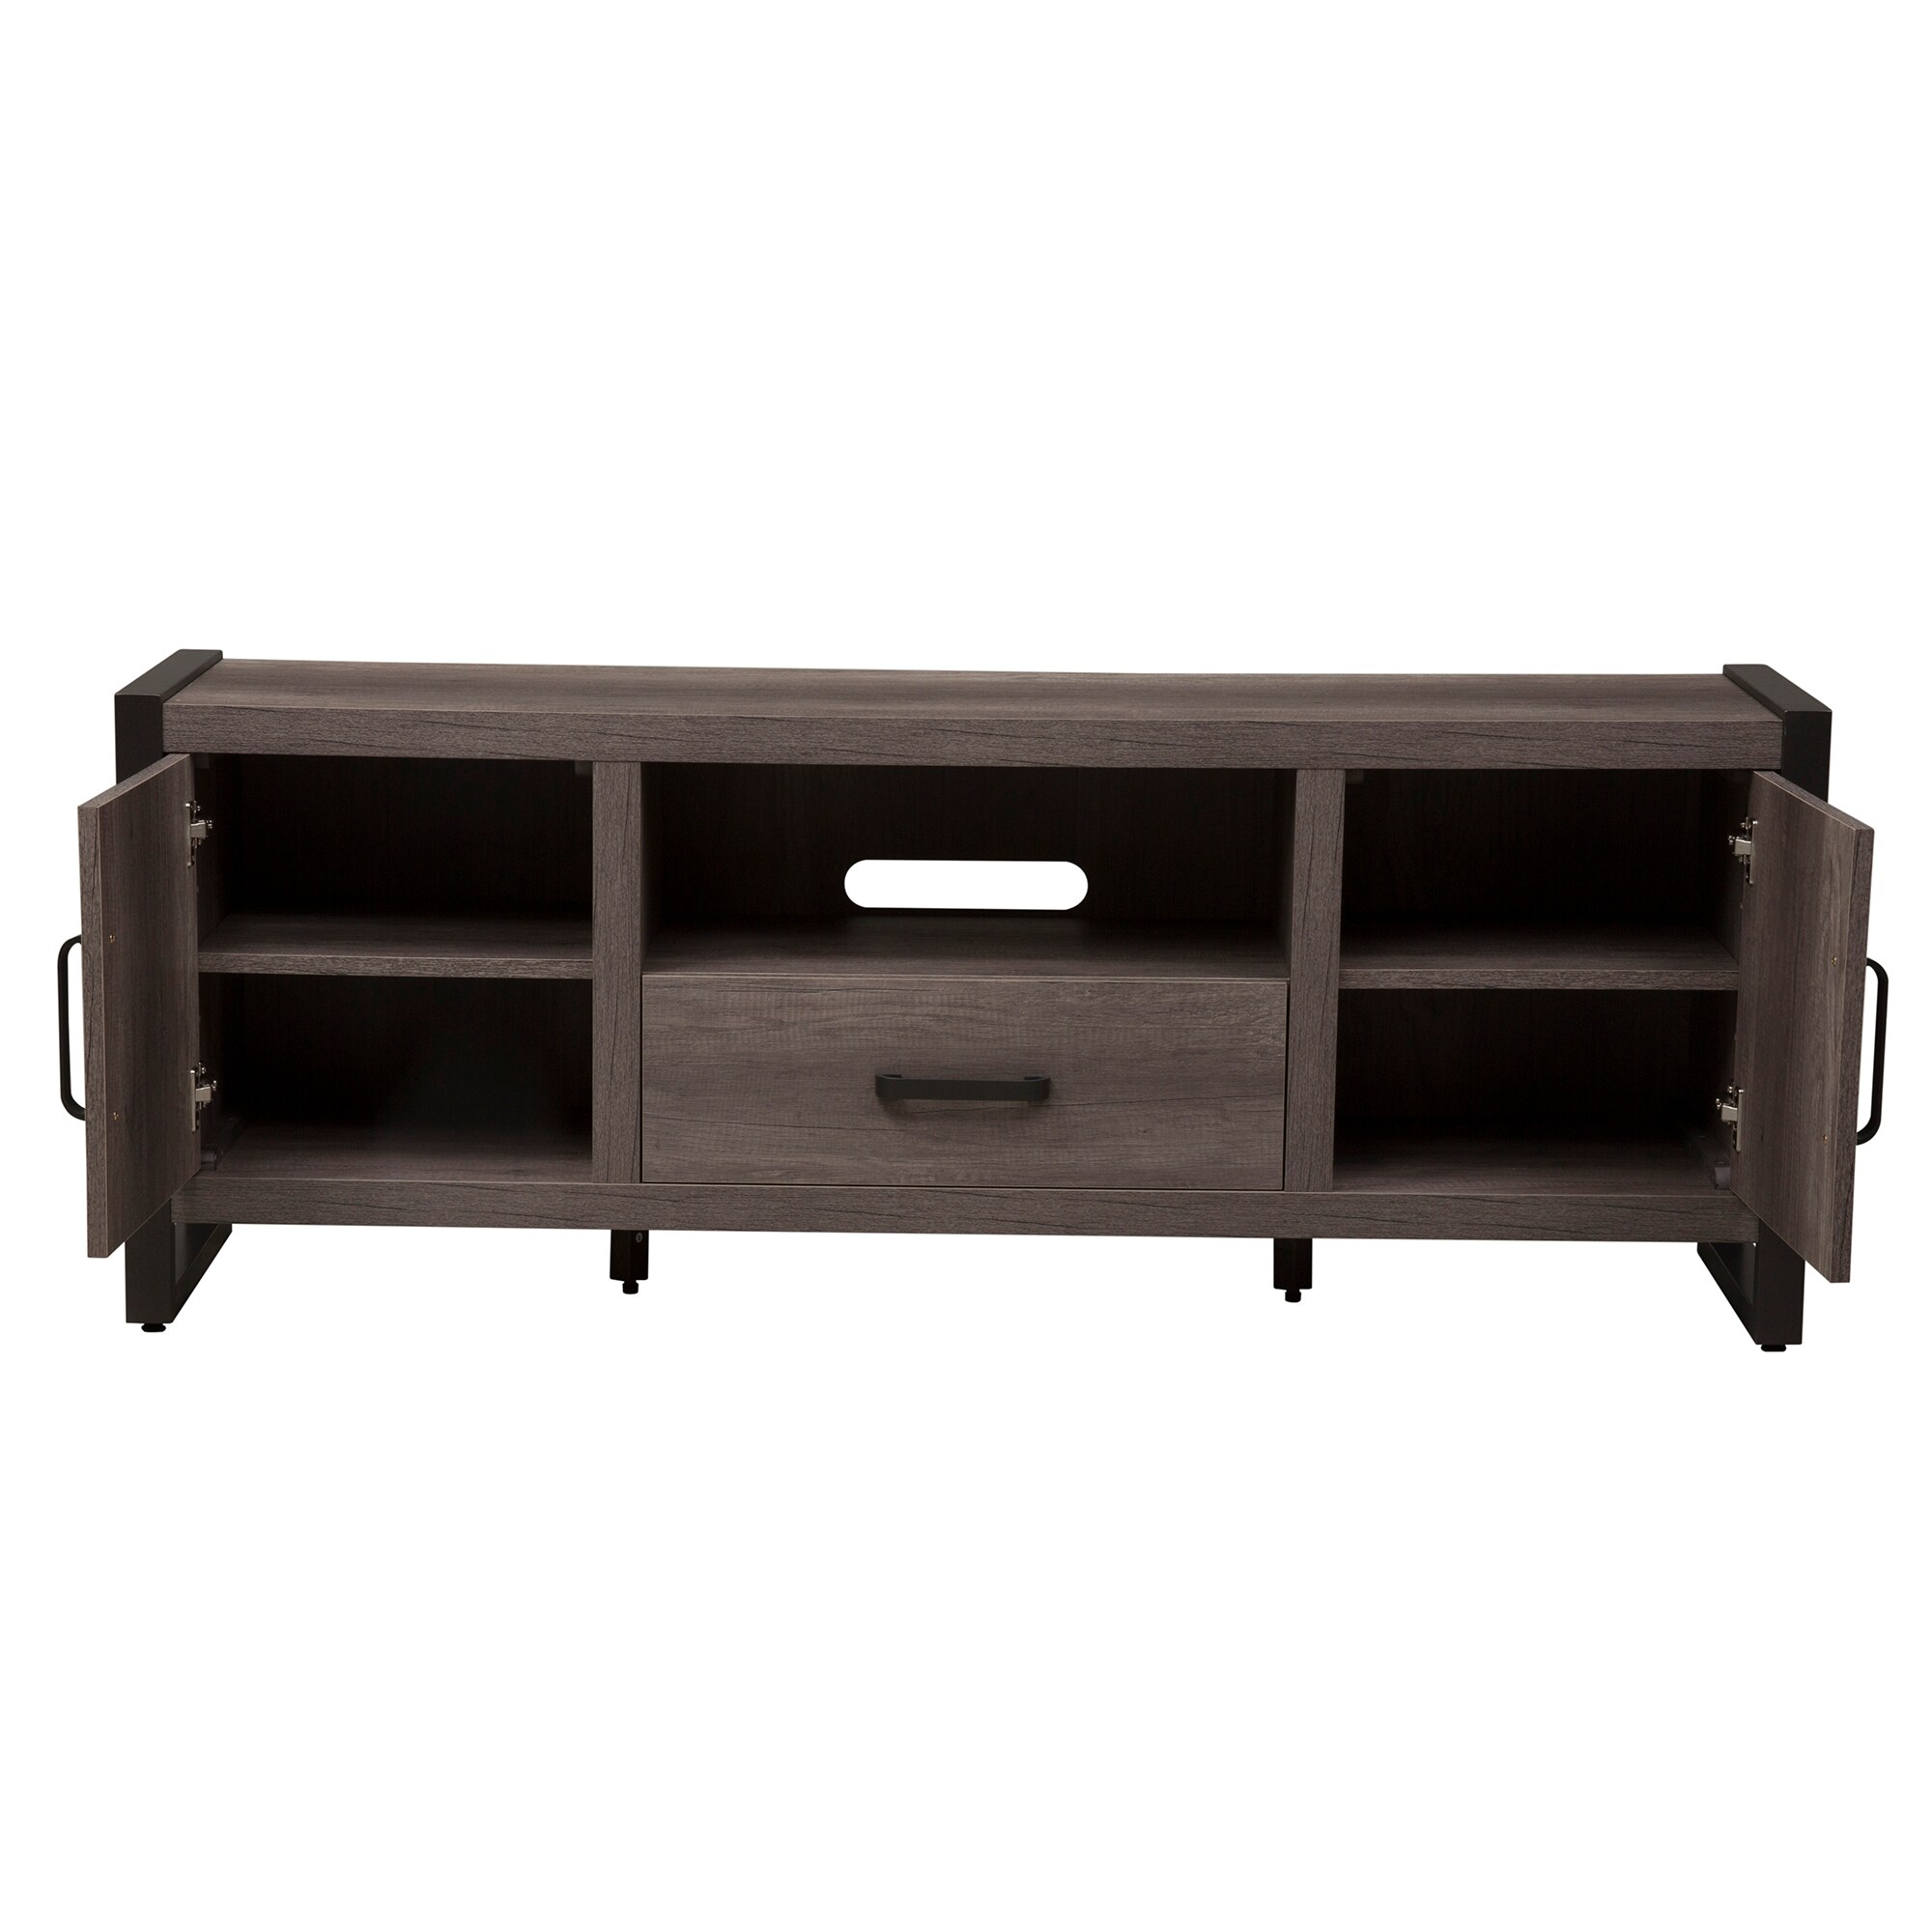 Tanners Creek Greystone Entertainment TV Stand - 64 inches in width